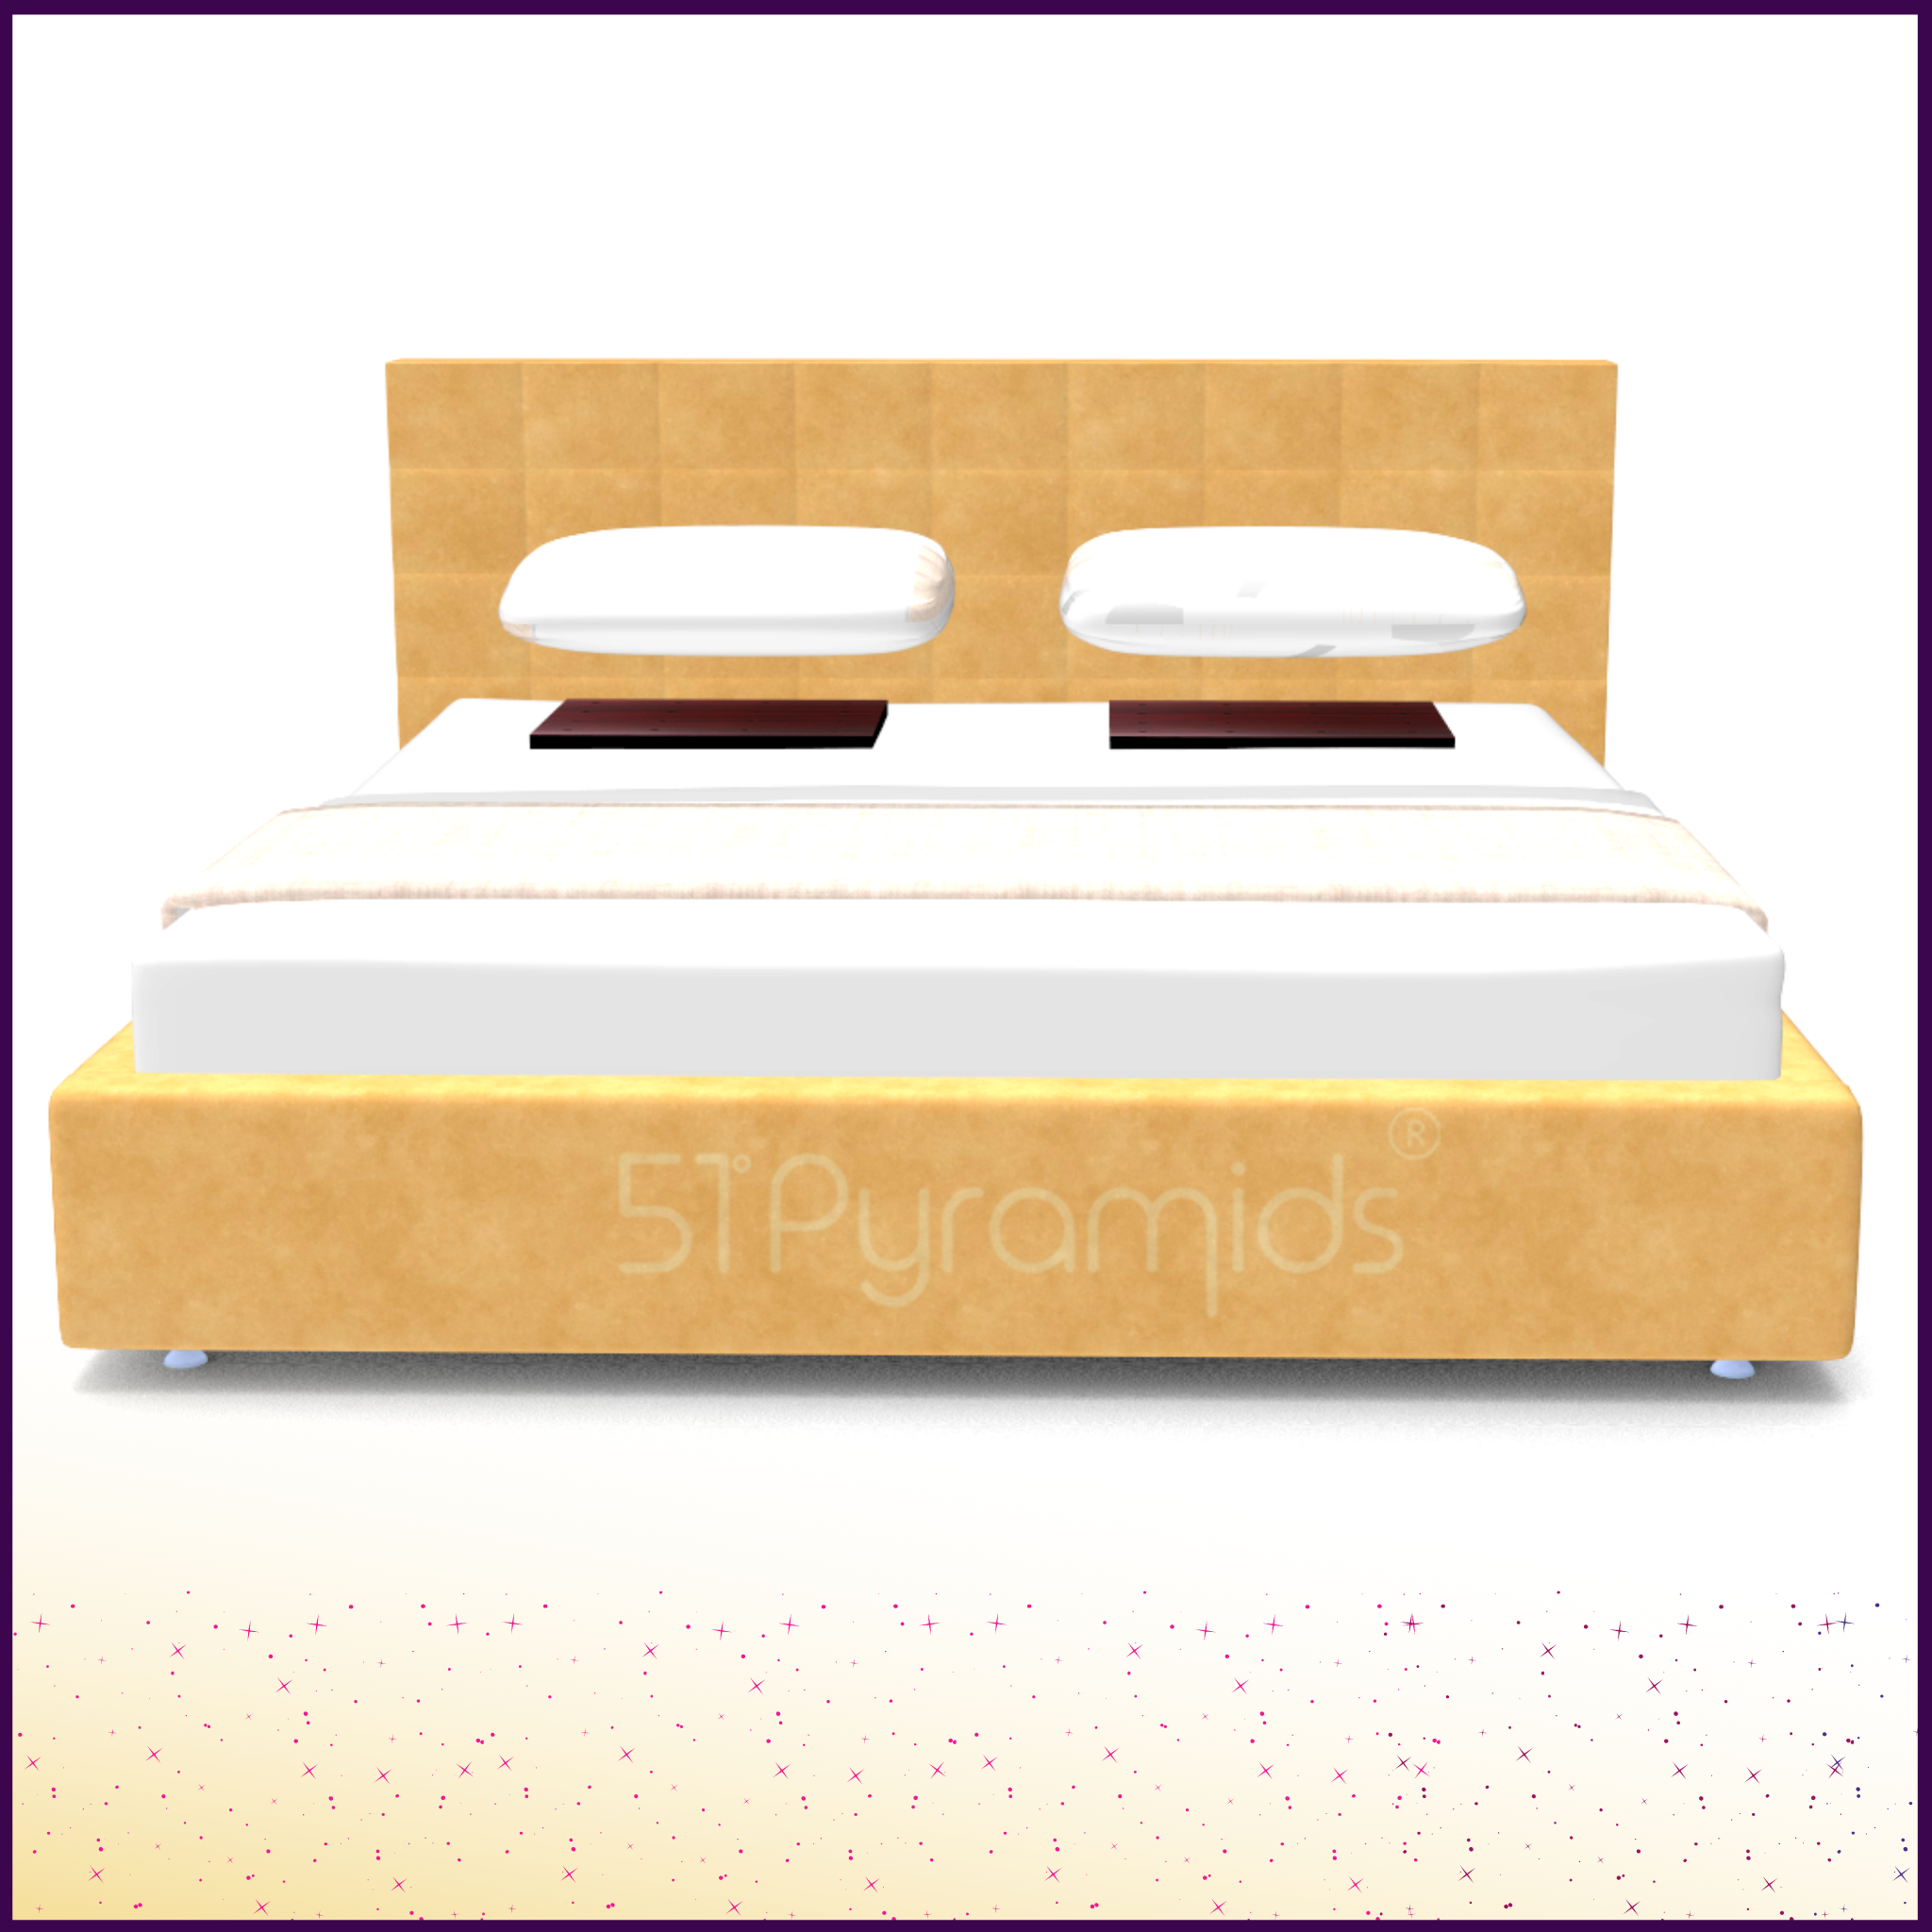 Set of 2 - Sleep Well Pillow Pyramid for Relaxed Fearless Sleep and Nightmare/Haunting Free Dreams - 51pyramids